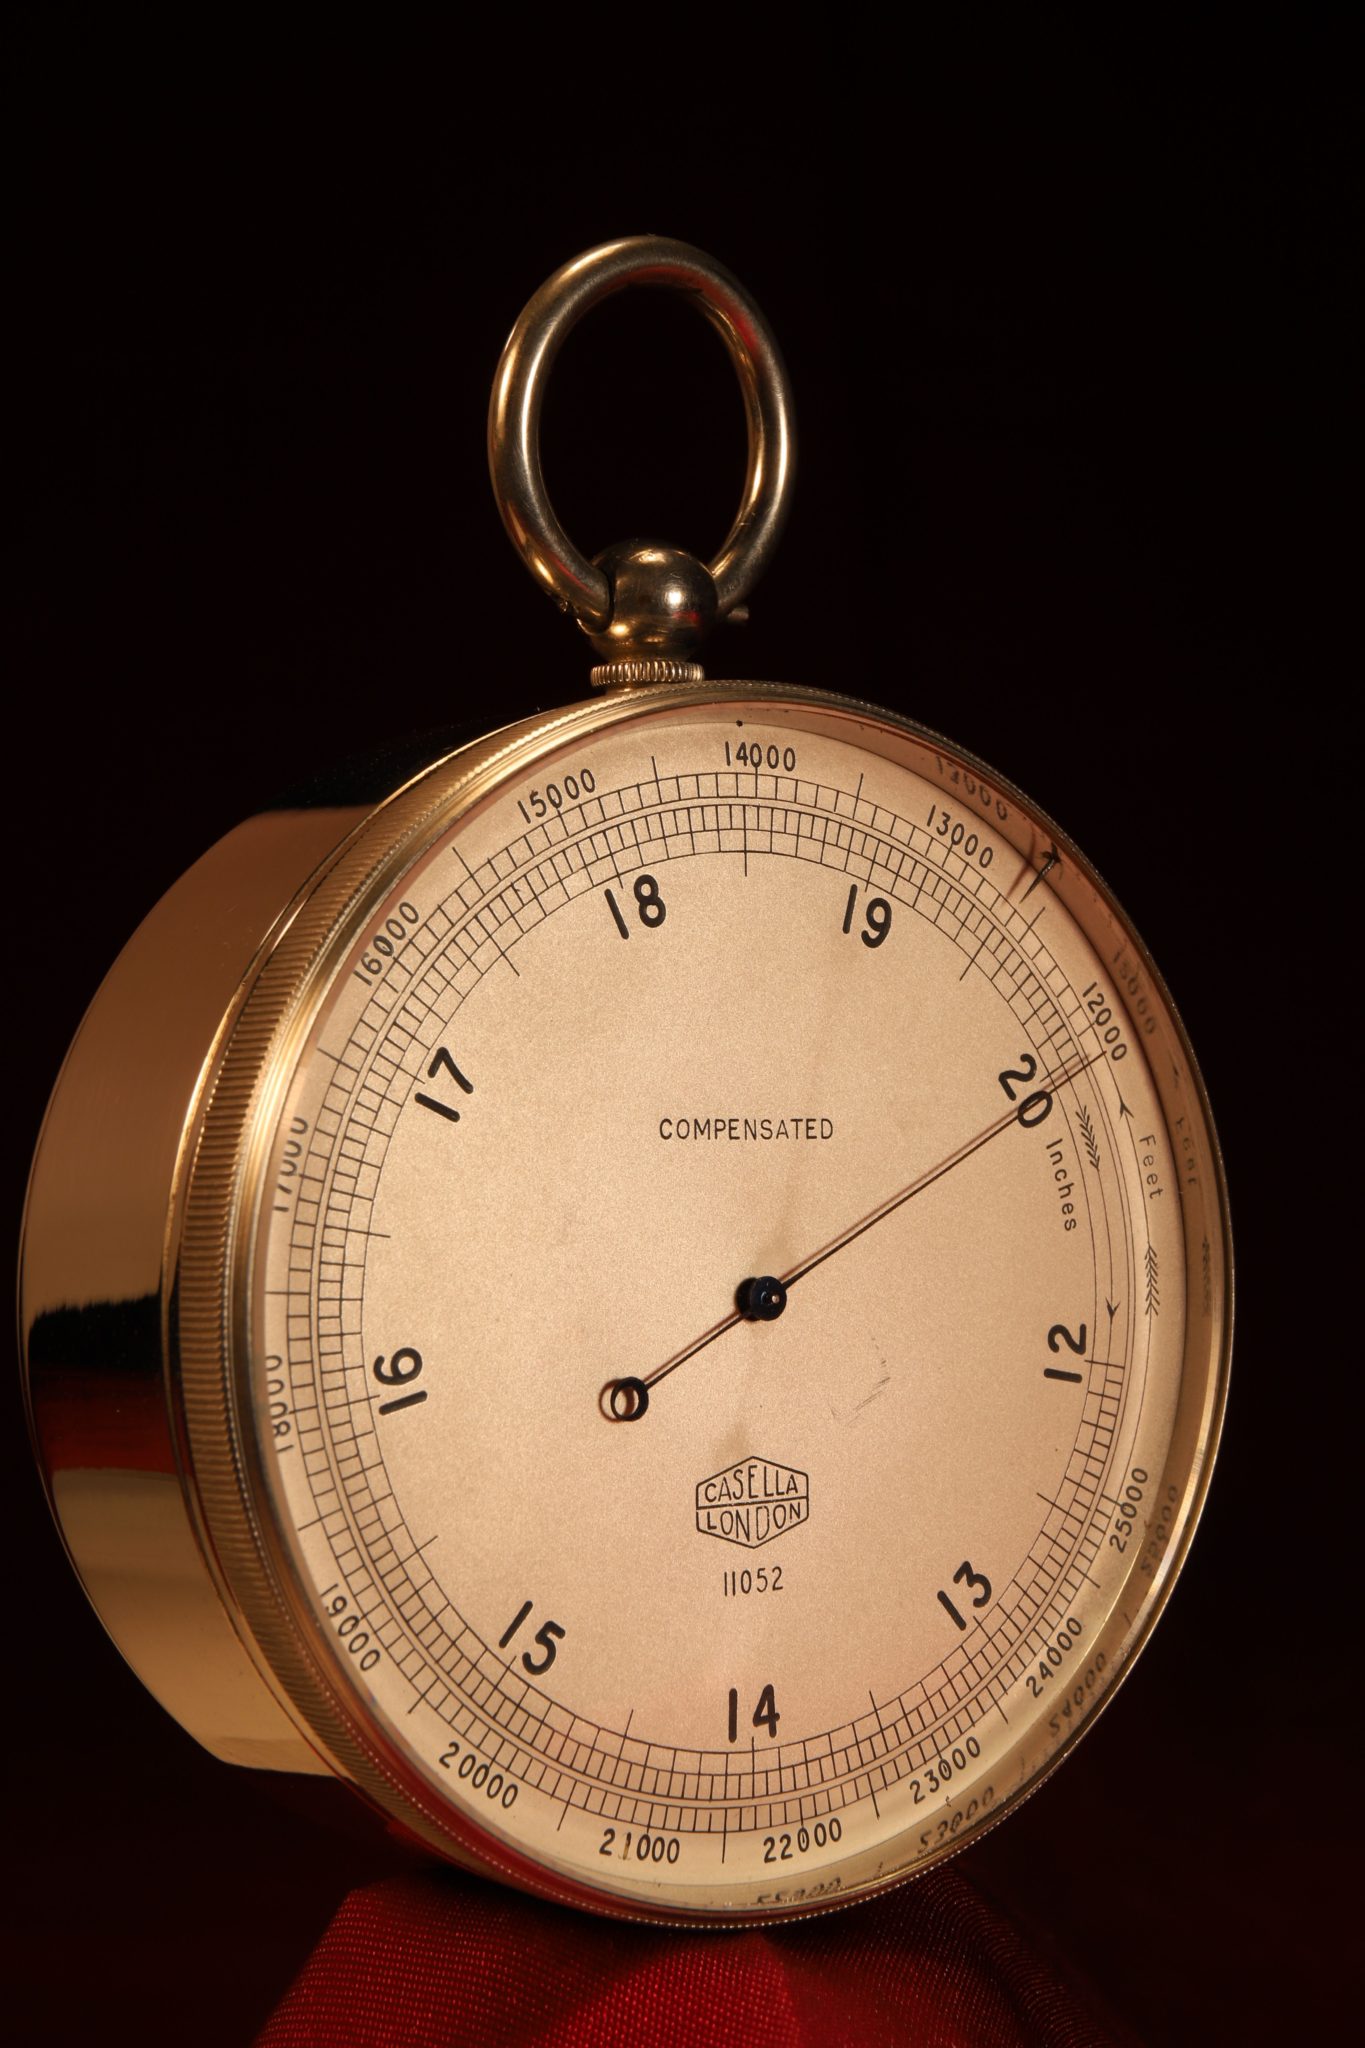 Image of Royal Geographical Society Pocket Altimeter No 59 by Casella